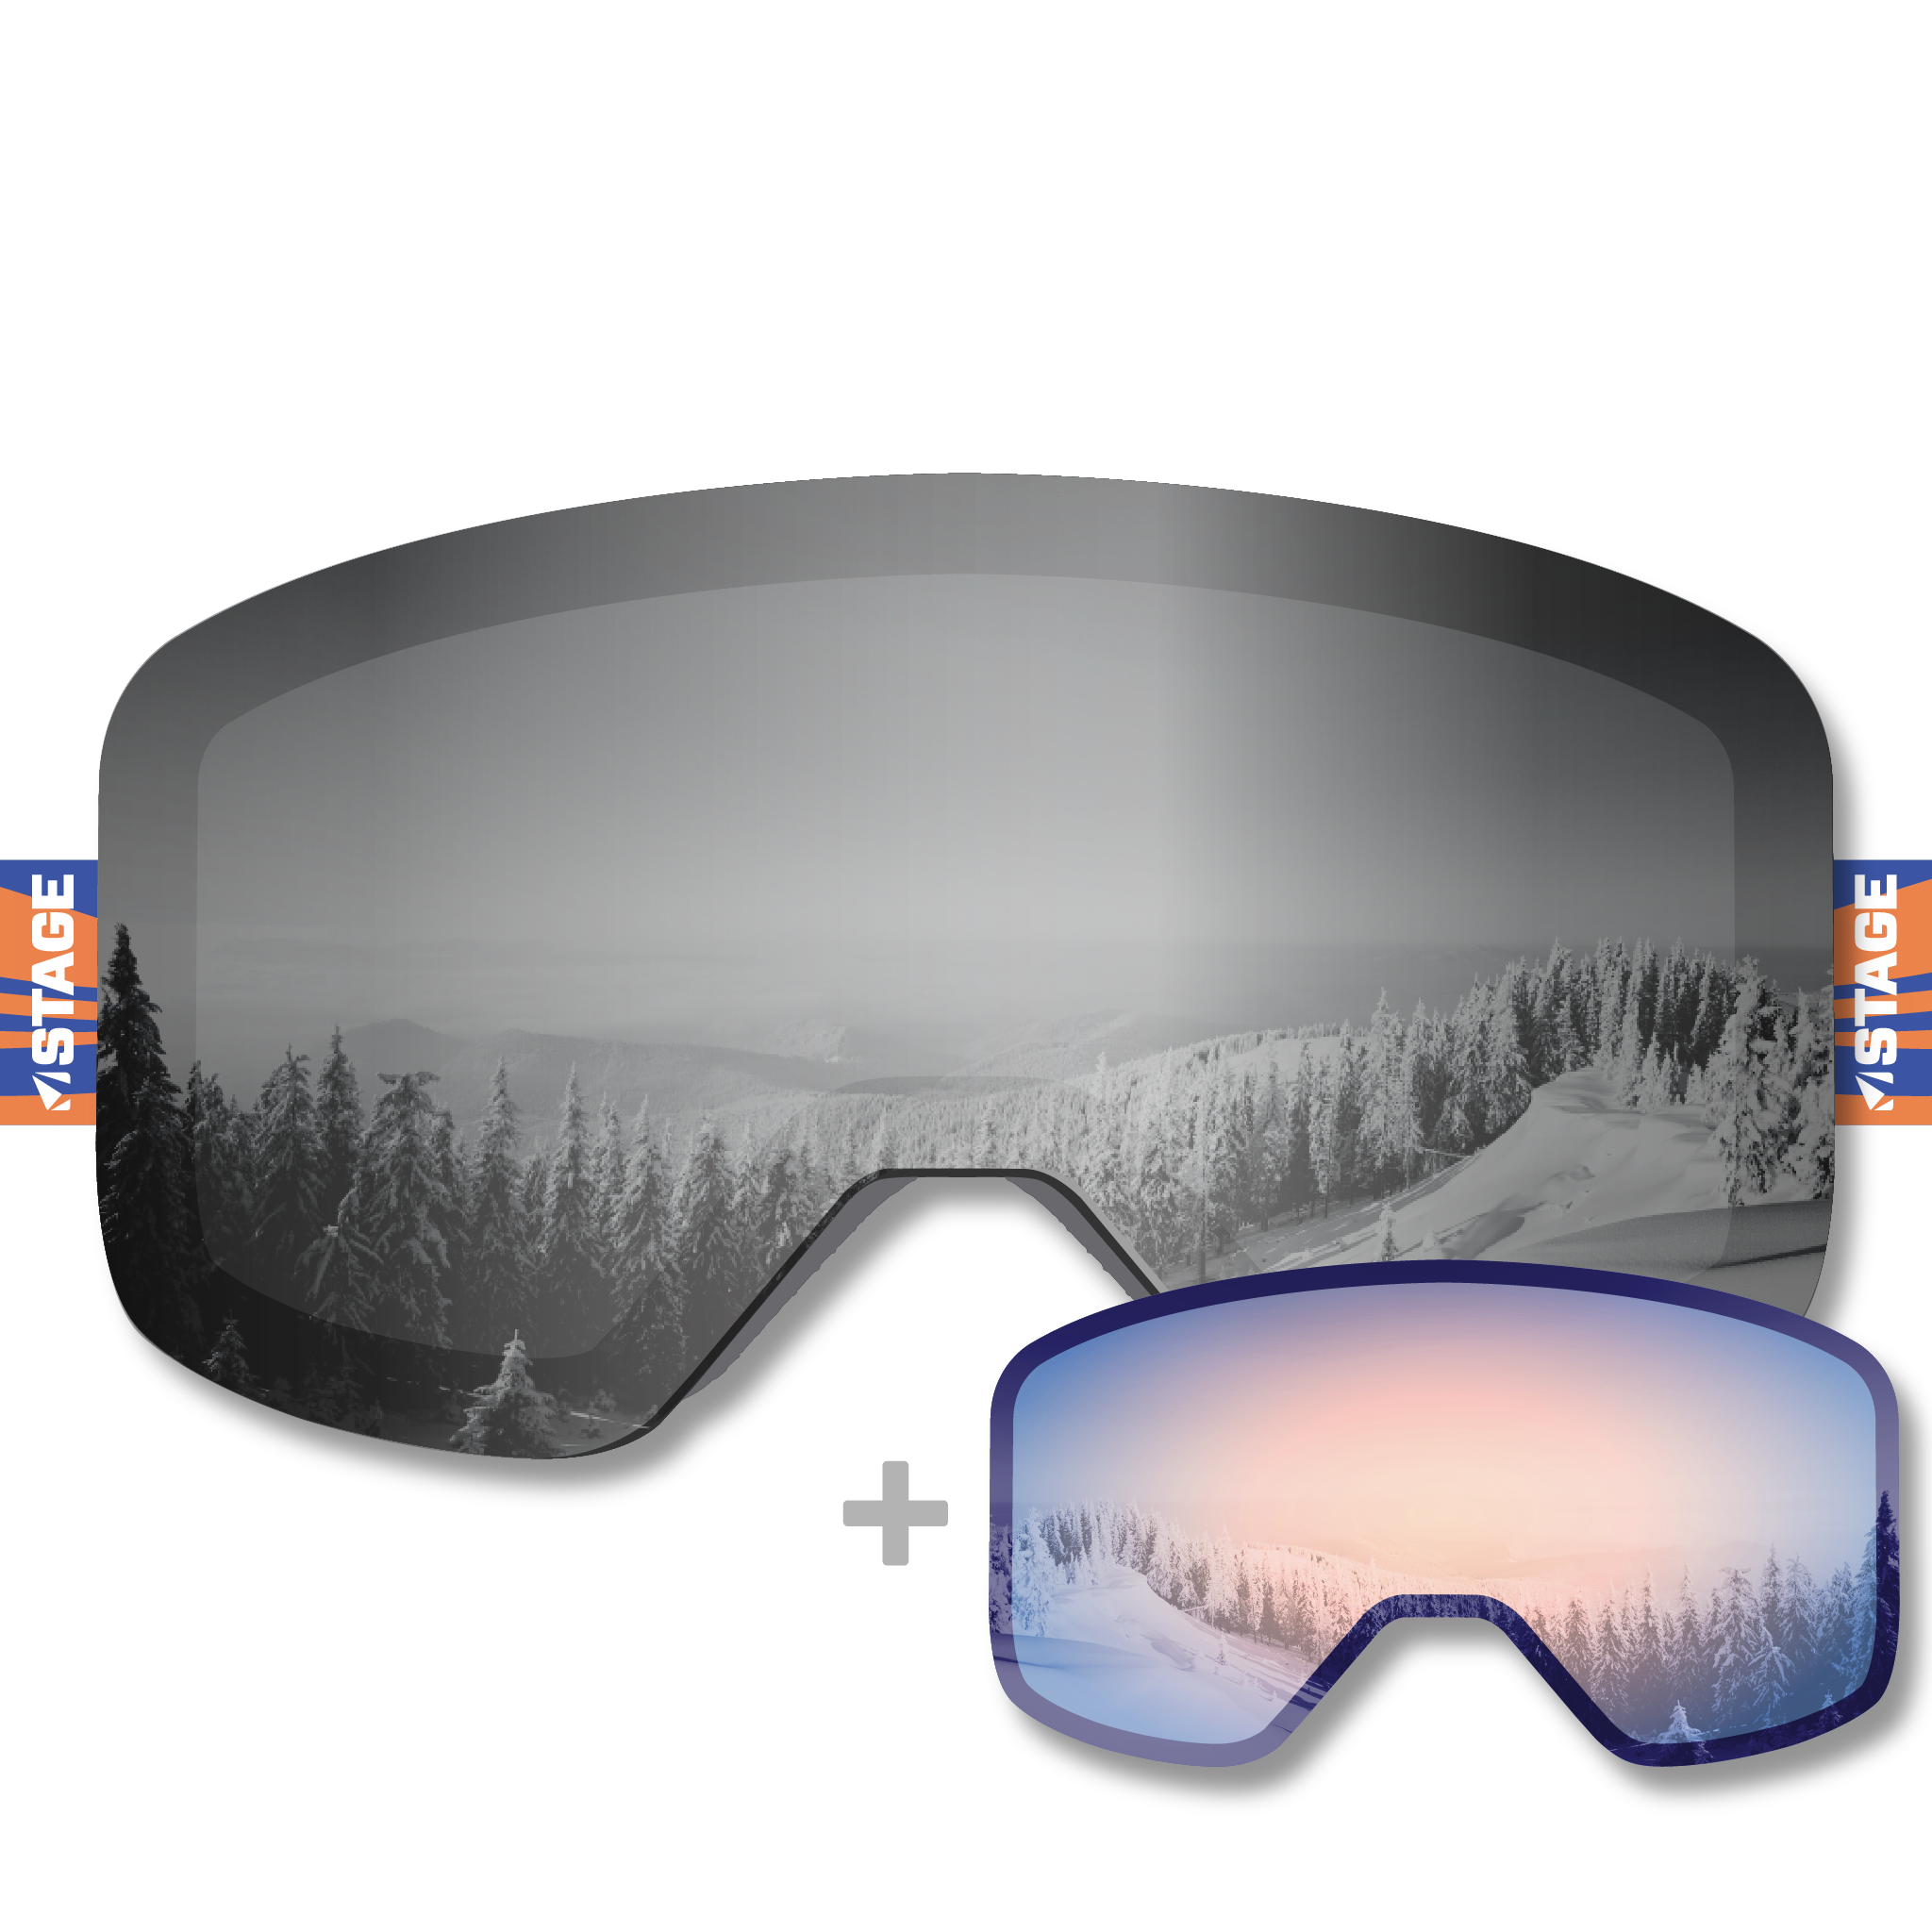 Product shot of the Challenged Athletes of West Virginia Propnetic Magnetic Ski Goggle which includes the Detector Revo Lens and Mirror Chrome Smoke lens.